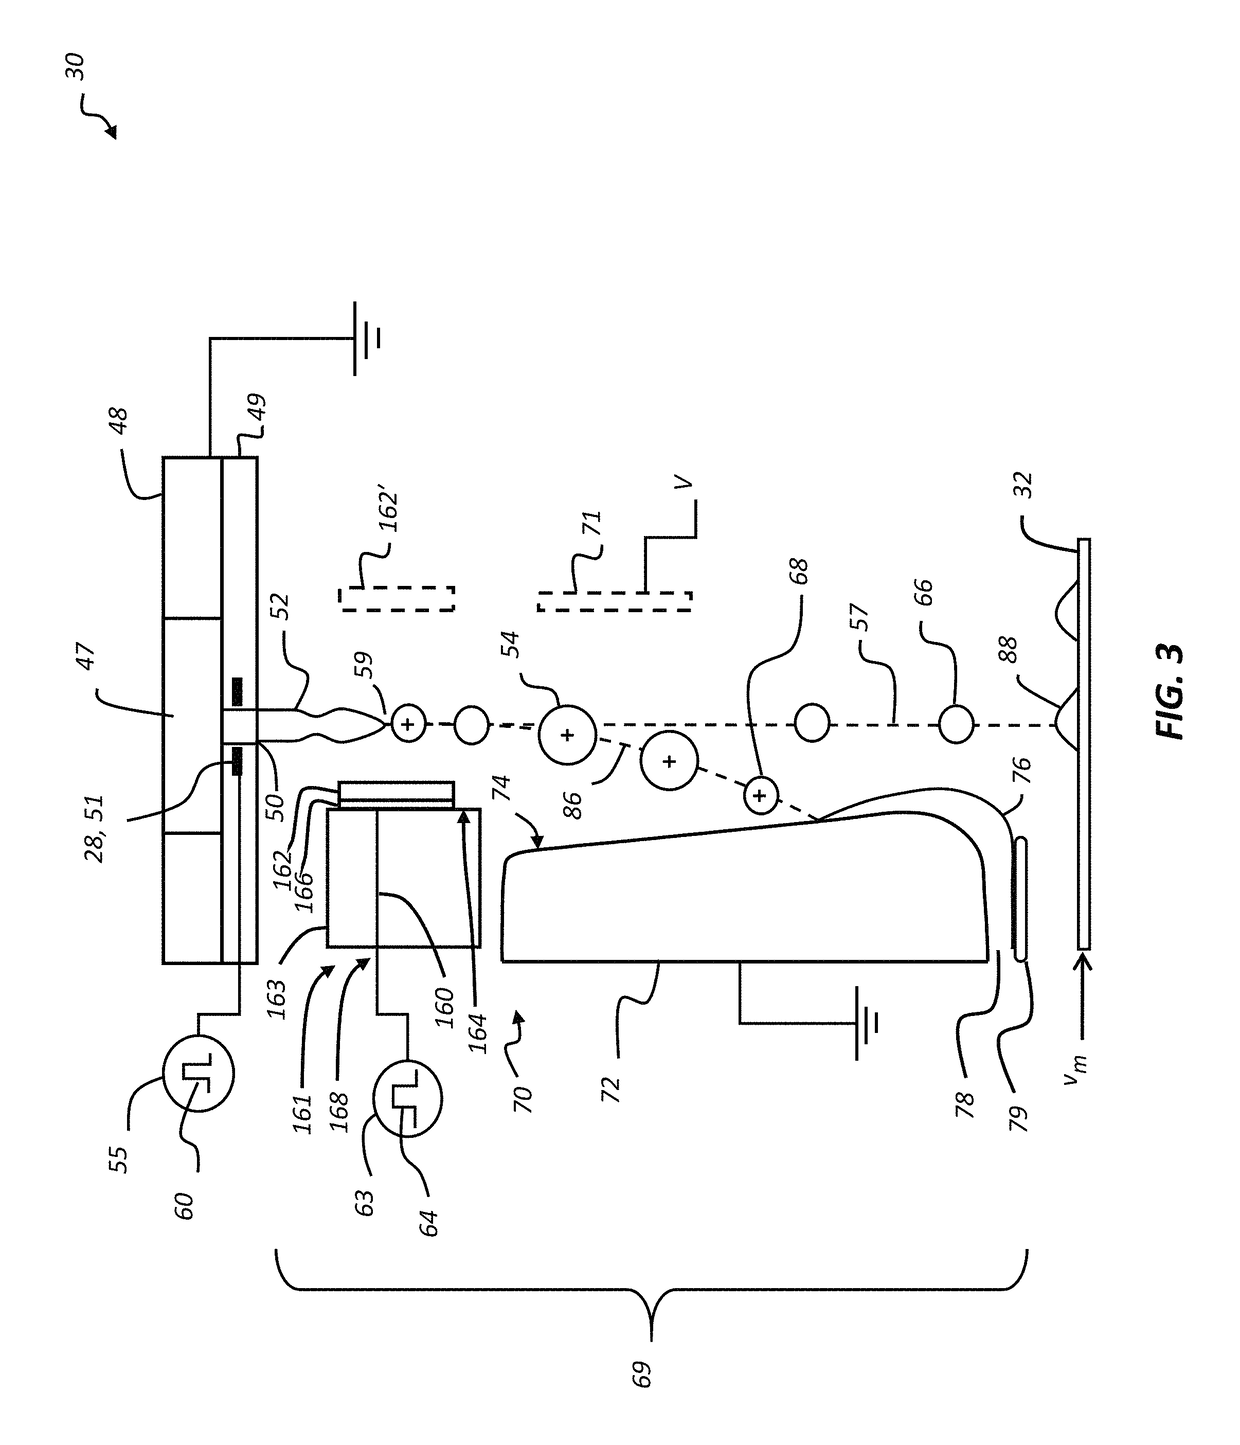 Method for fabricating a charging device